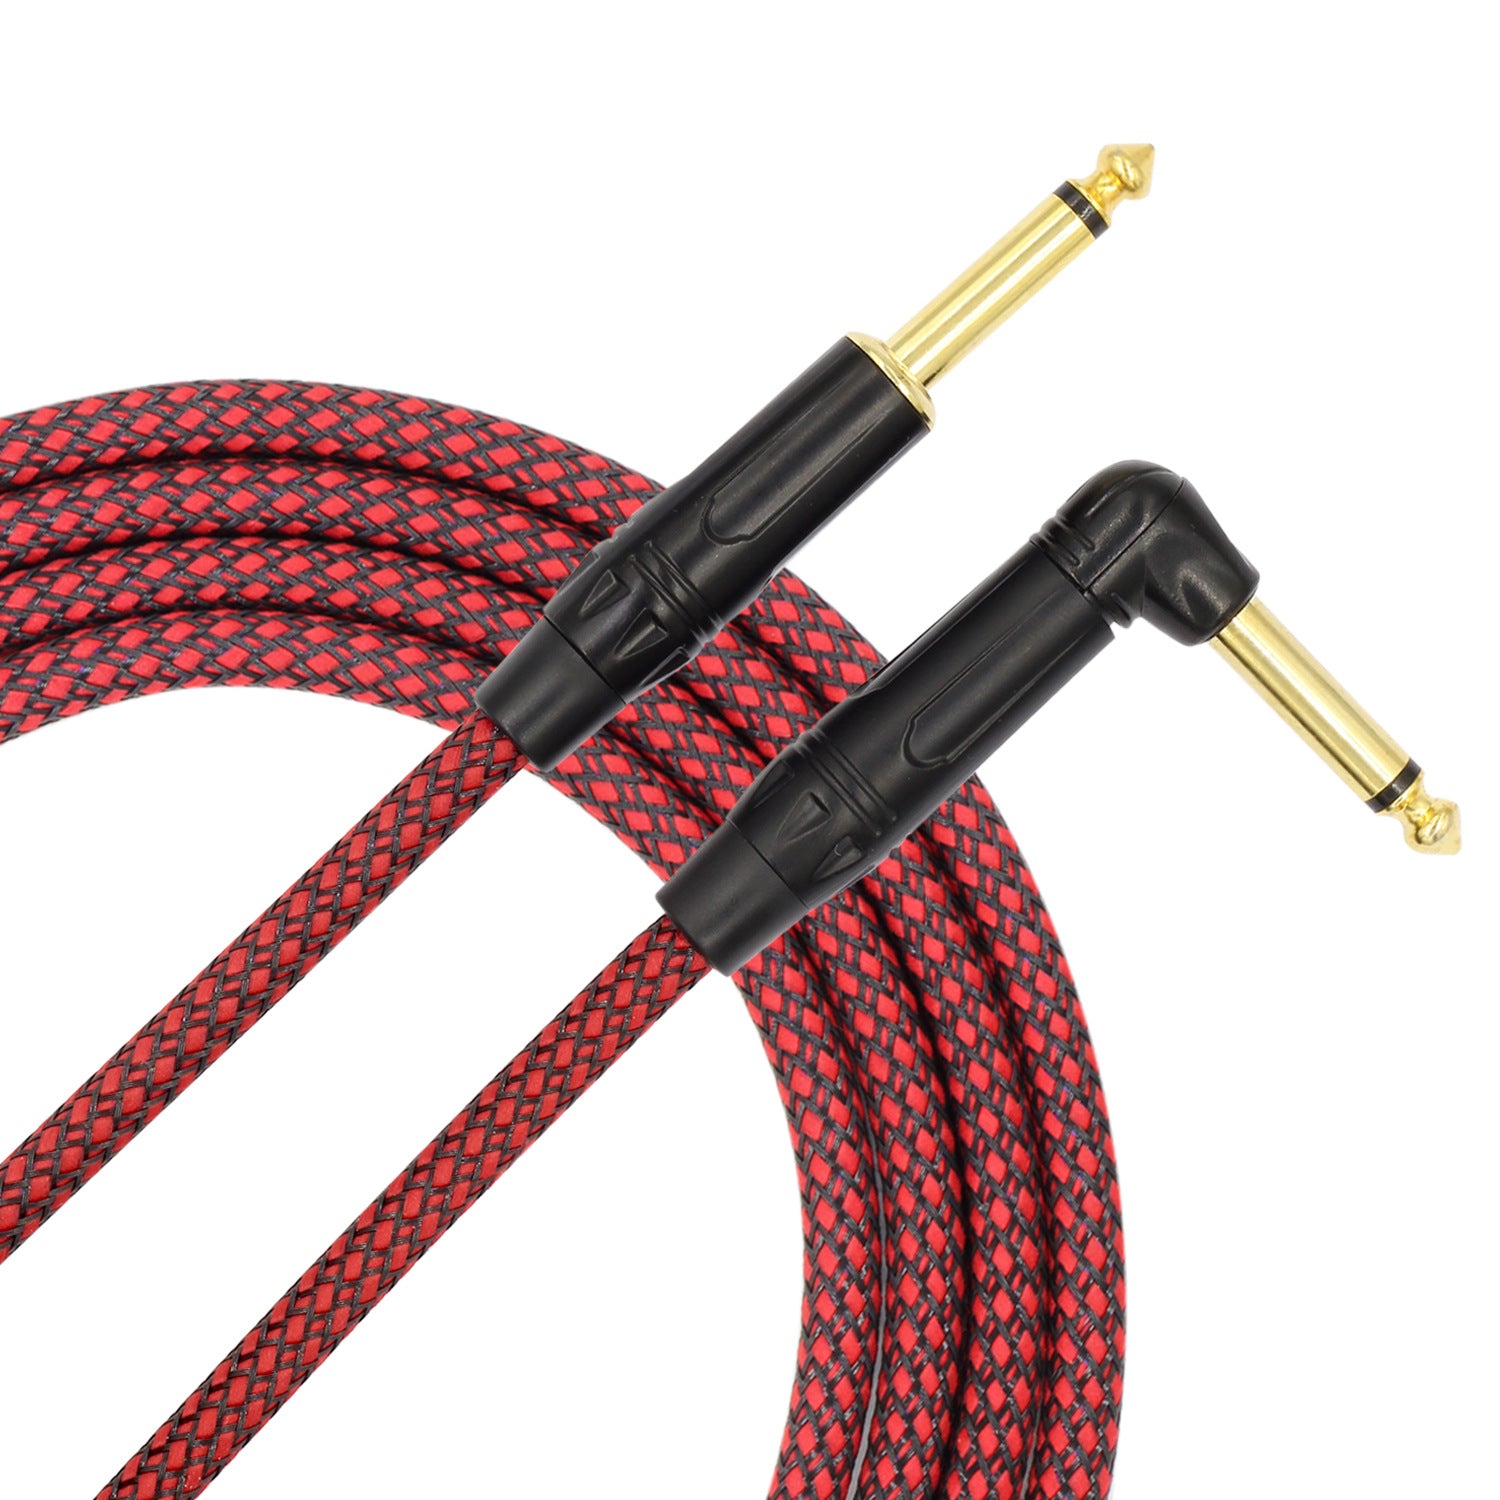 Kalena Gold-plated TS 1/4" shielded cable with one L and one straight connector and aluminum cover - Kalena Instruments / Red & Black woven